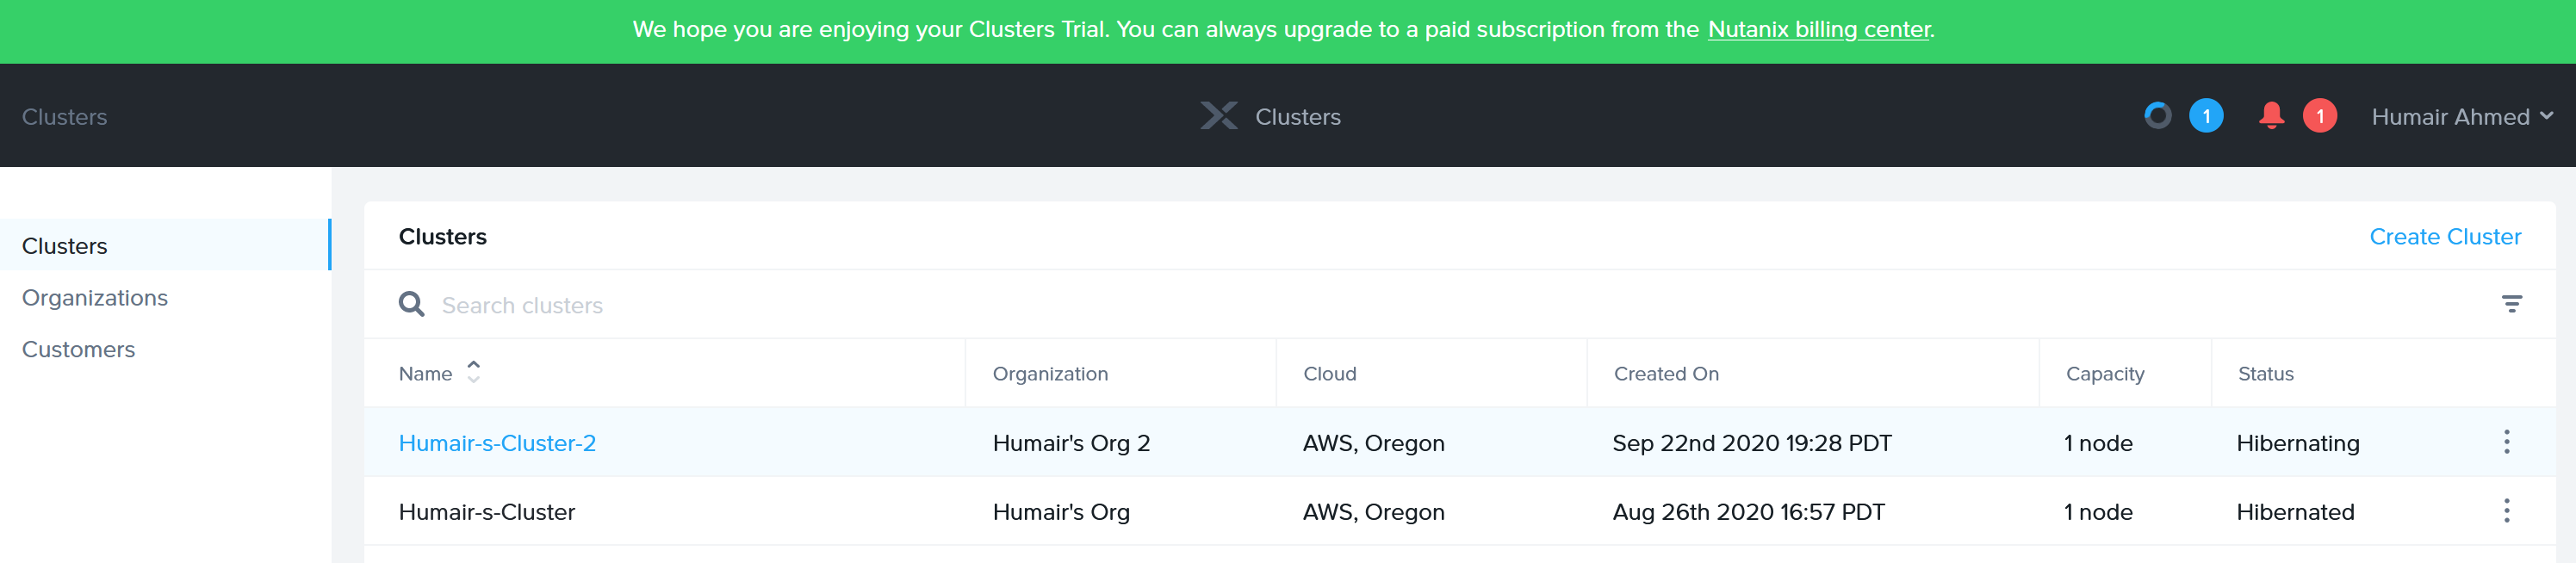 Nutanix Clusters on AWS -  'Humair-s-Cluster-2' Cluster Starting to Hibernate